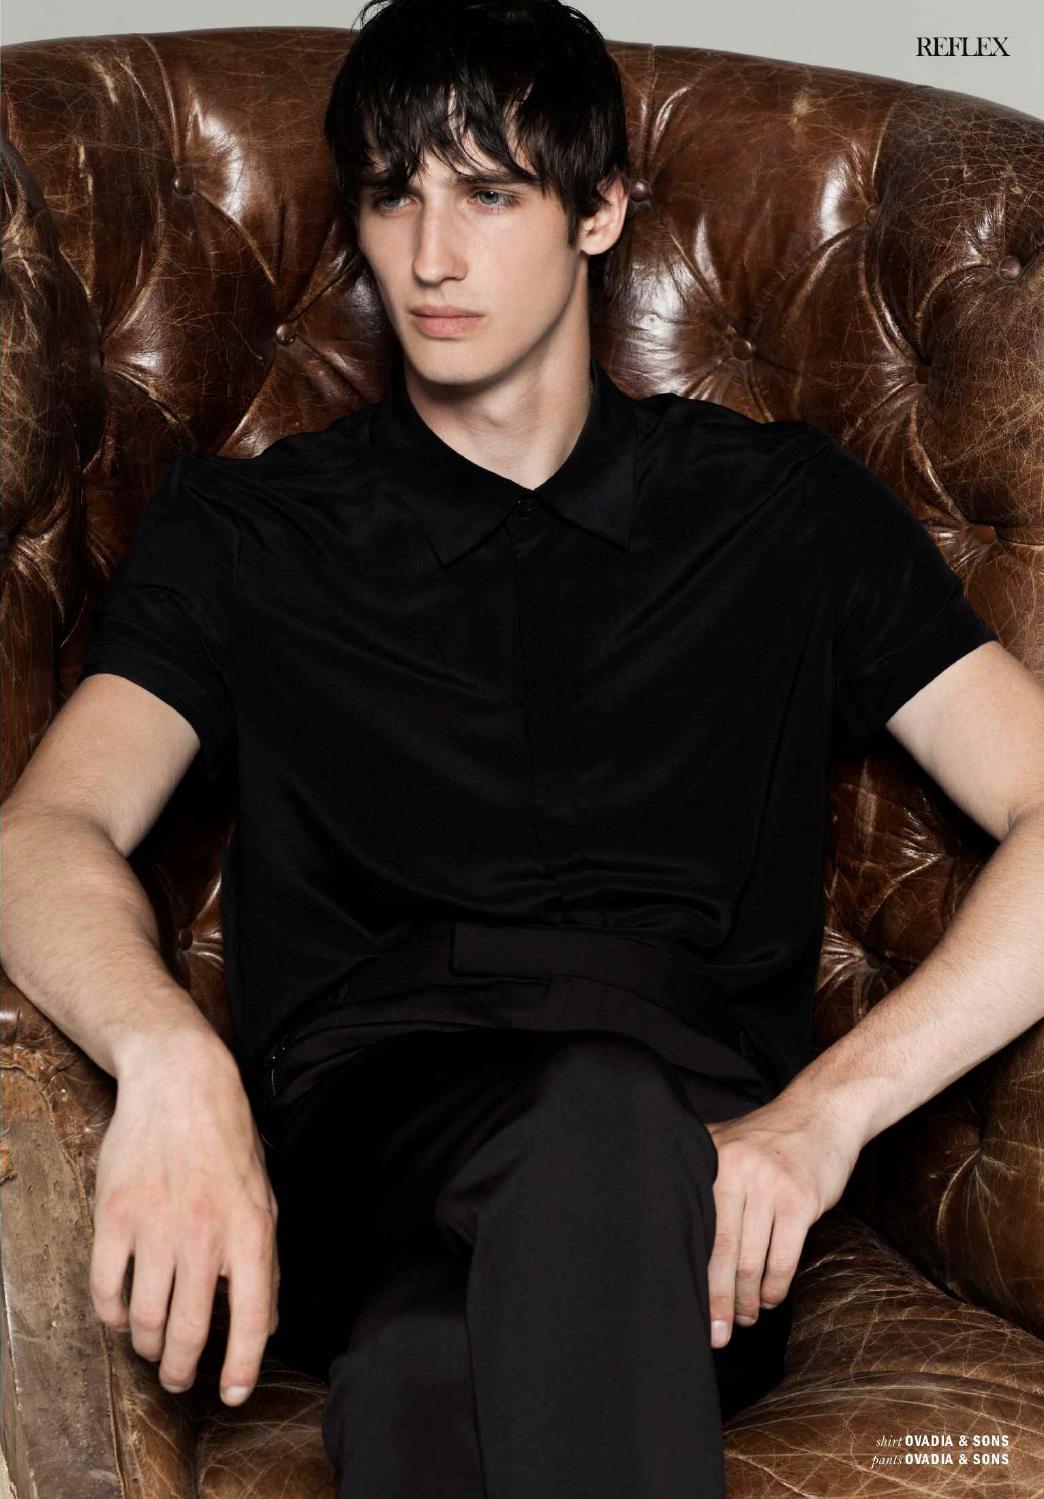 Ian Sharp is Chic & Sporty for Reflex Homme Spread